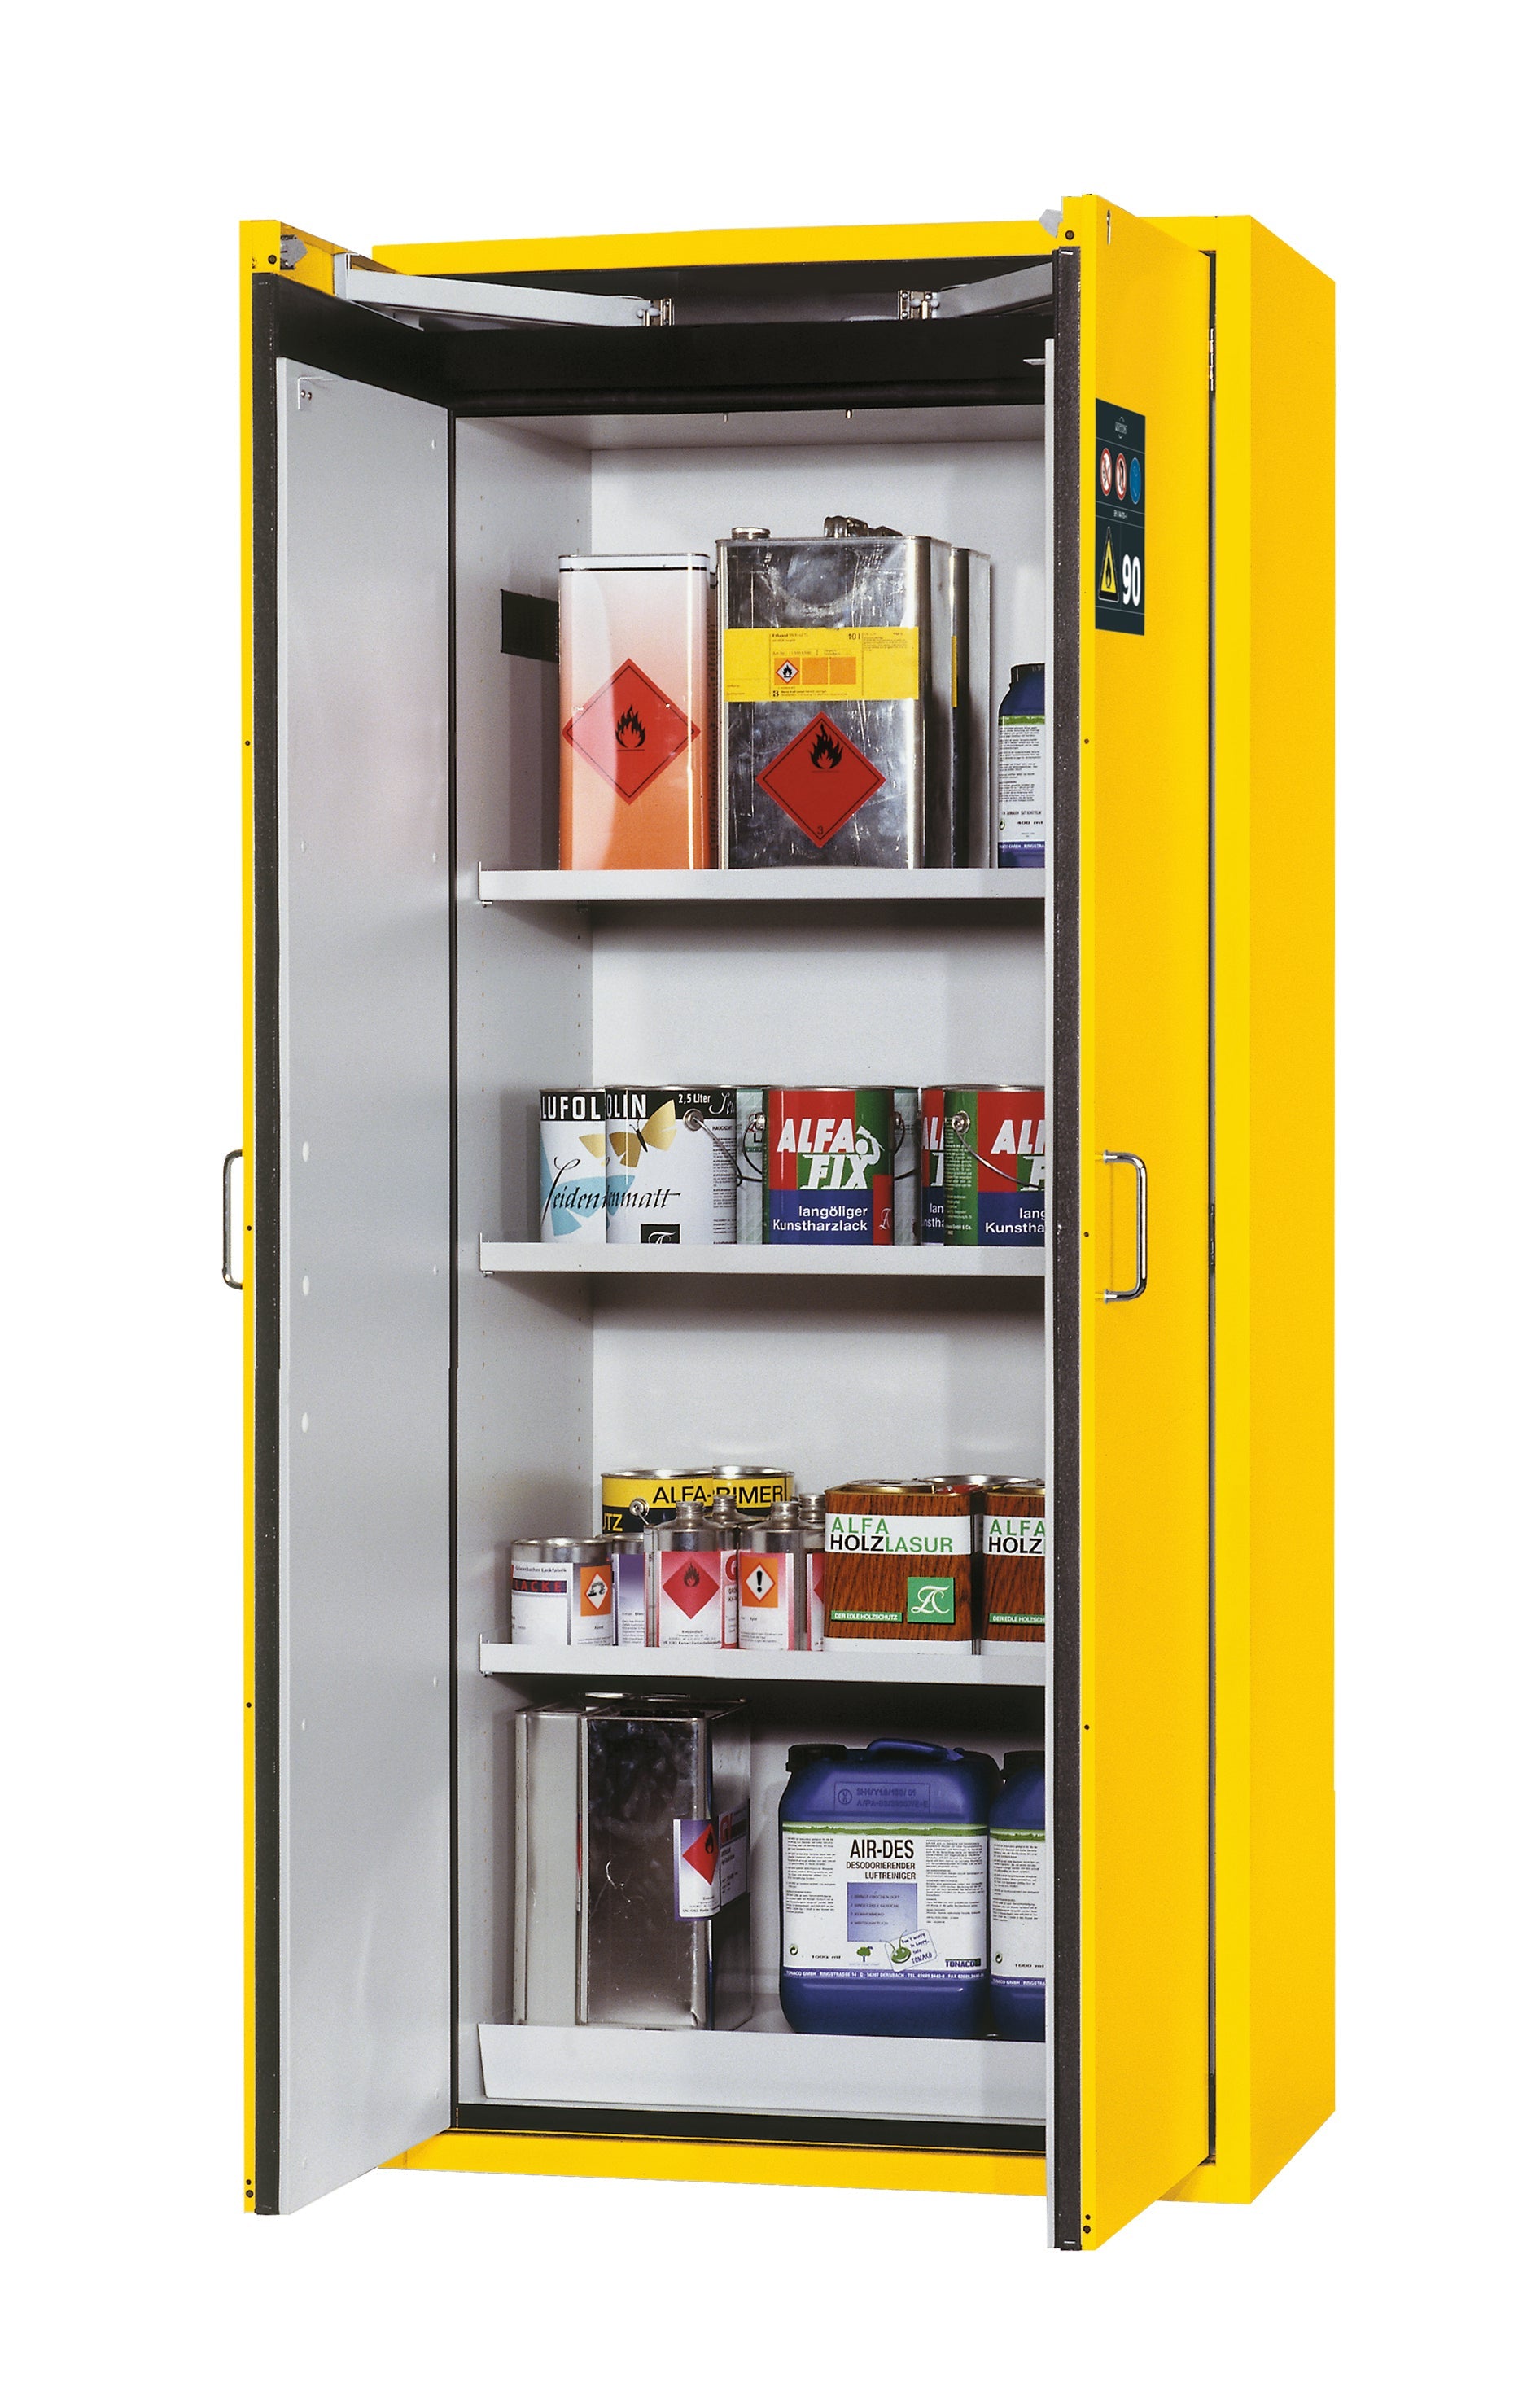 Type 90 safety cabinet S-CLASSIC-90 model S90.196.090 in safety yellow RAL 1004 with 3x standard shelves (sheet steel)